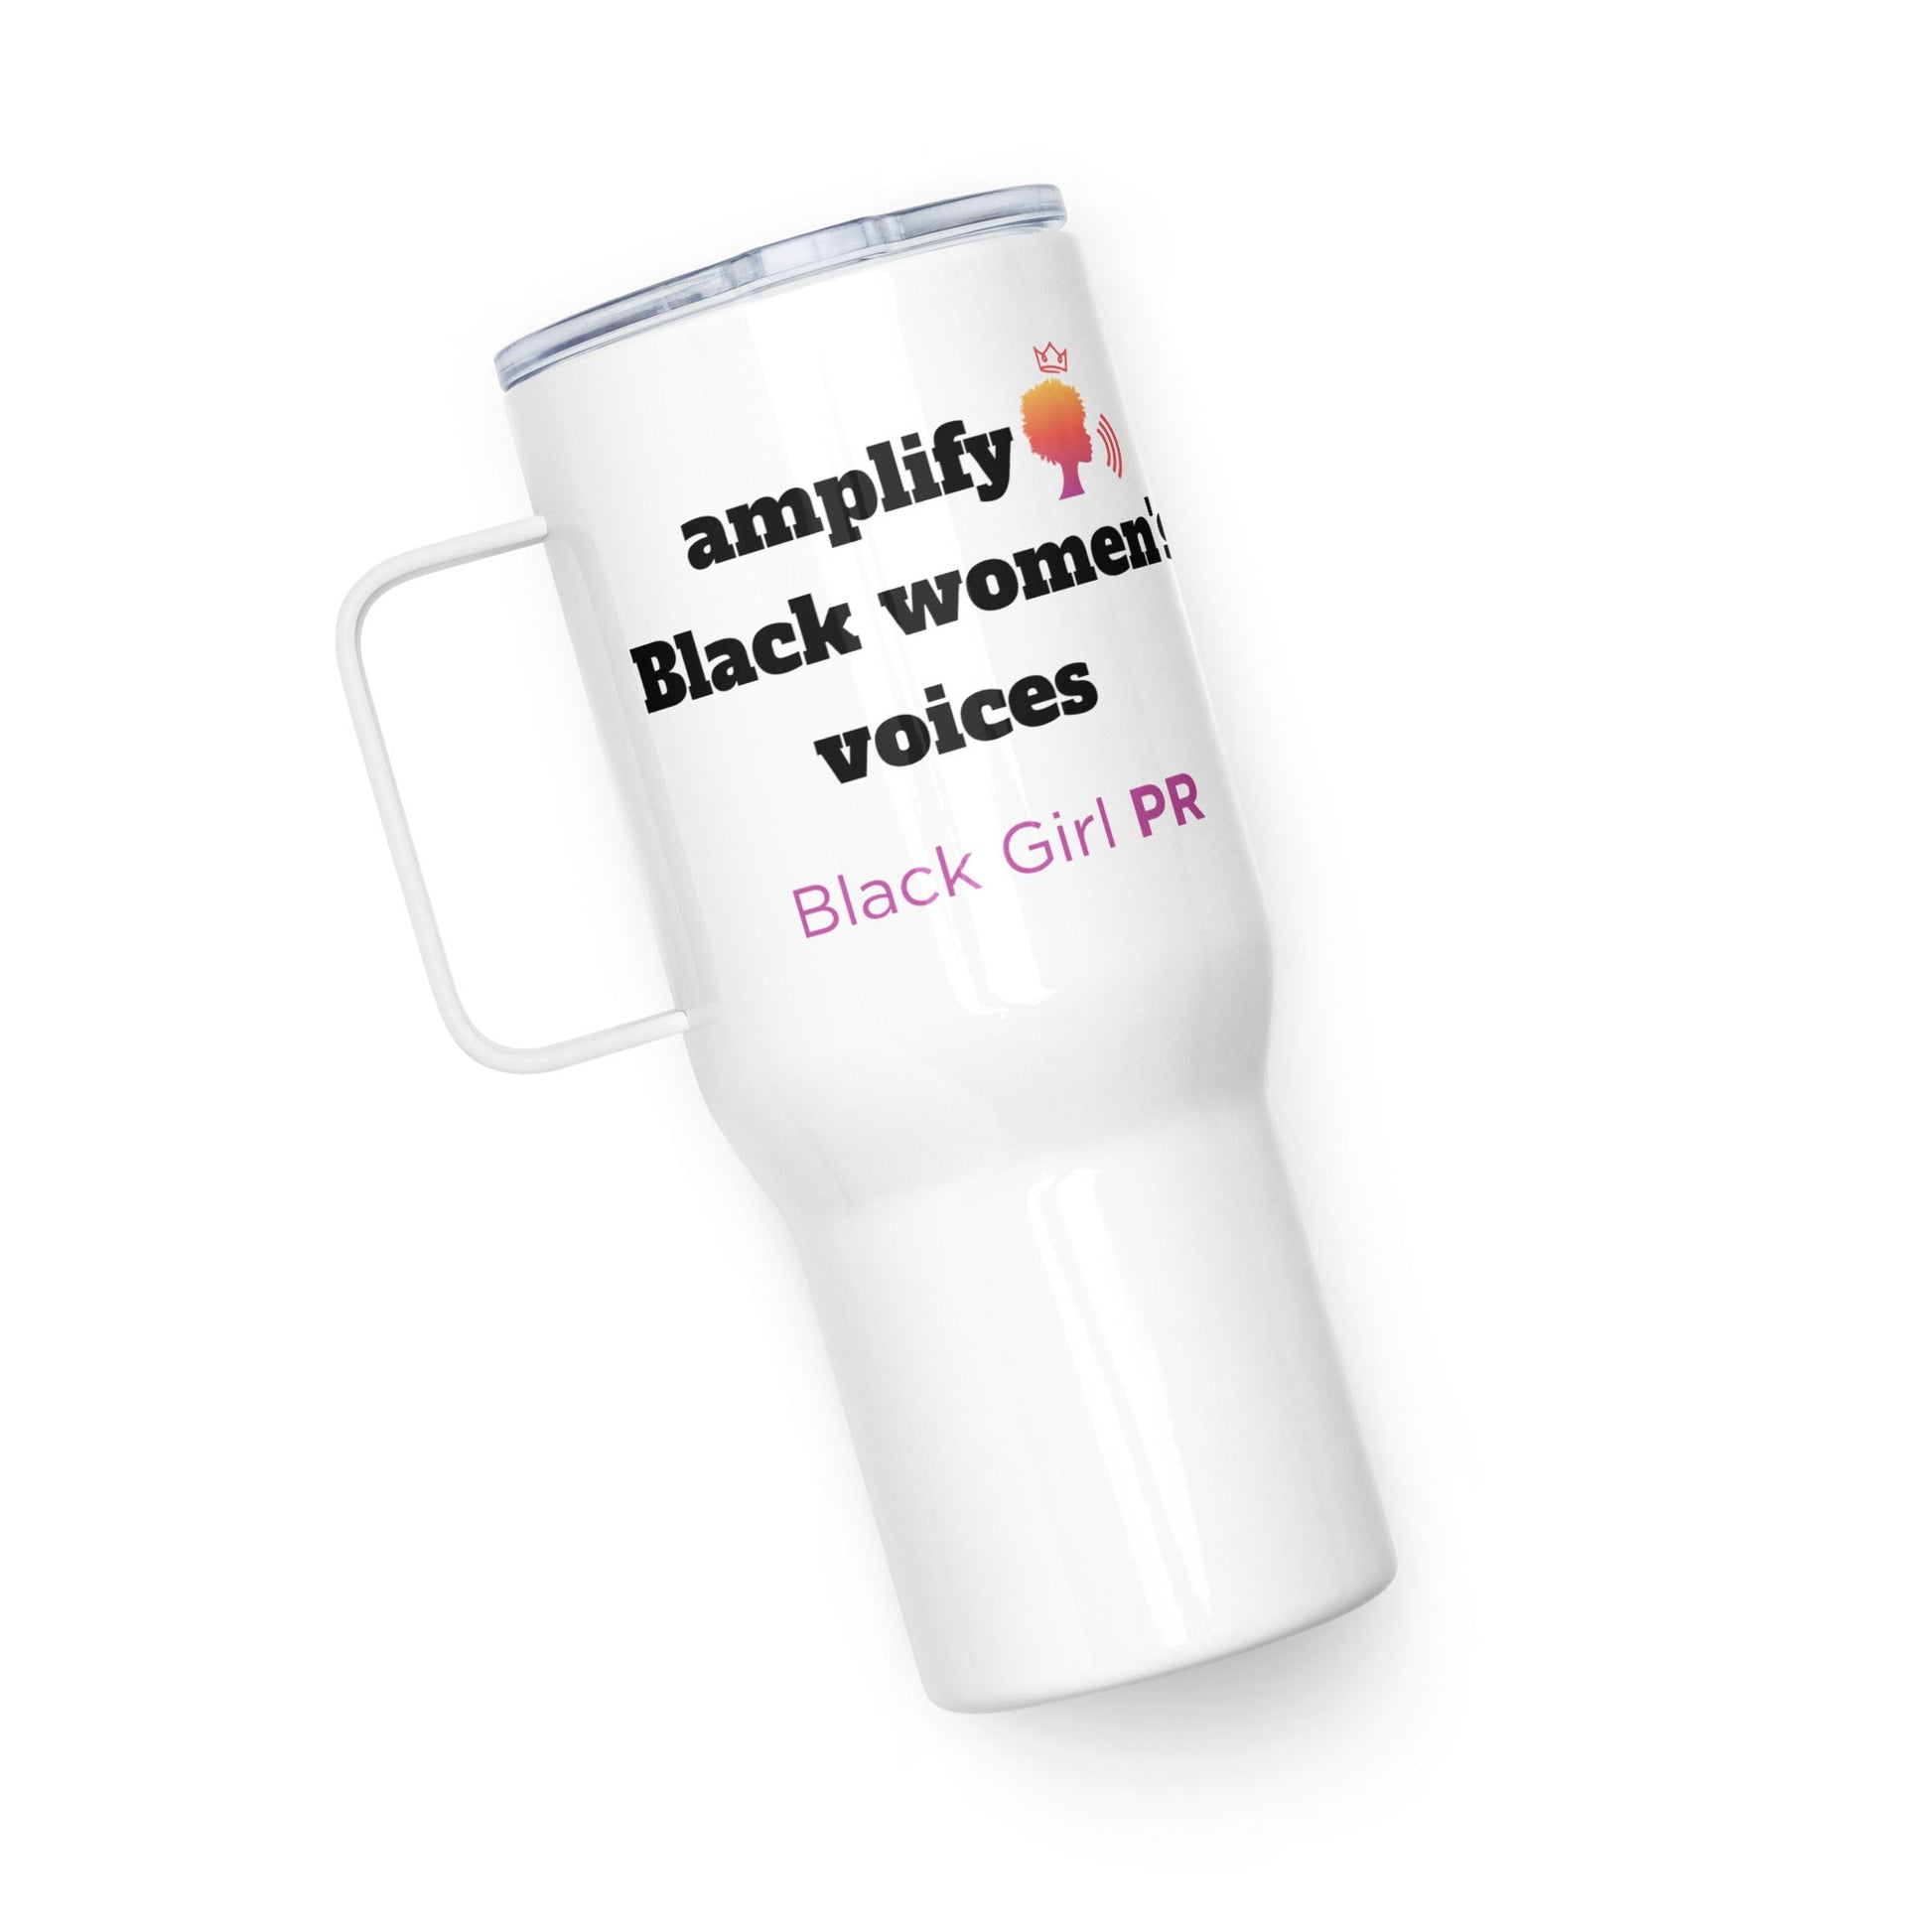 Amplify Black Women's Voices Stainless Steel Travel Mug With Handle - Black Girl PR™